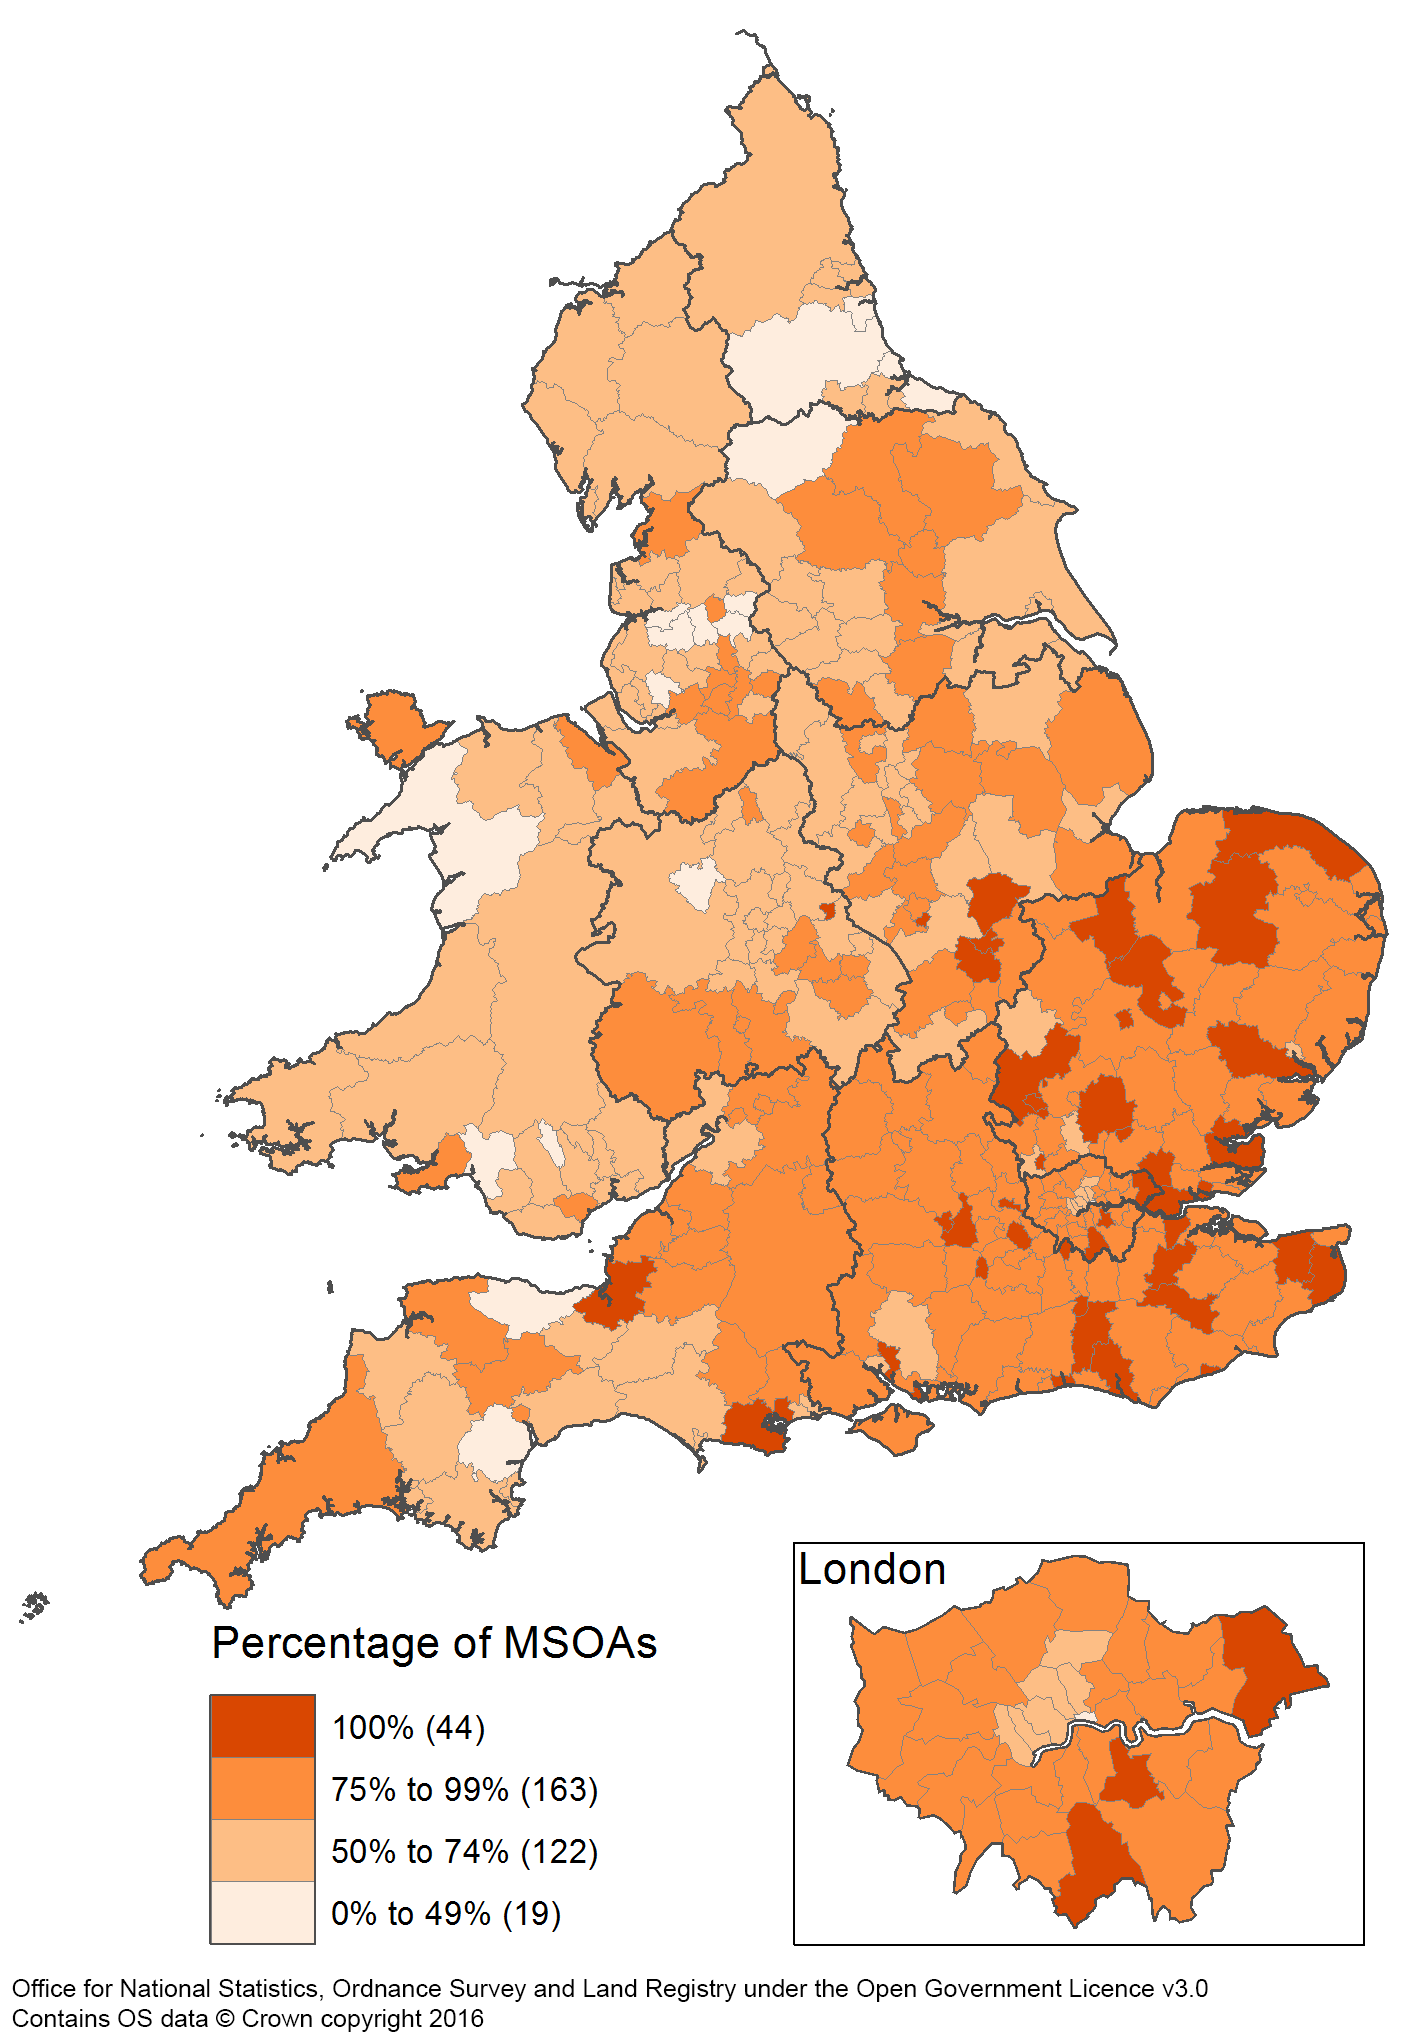 Most local authorities had at least 50% of  MSOAs with an increasing price paid.